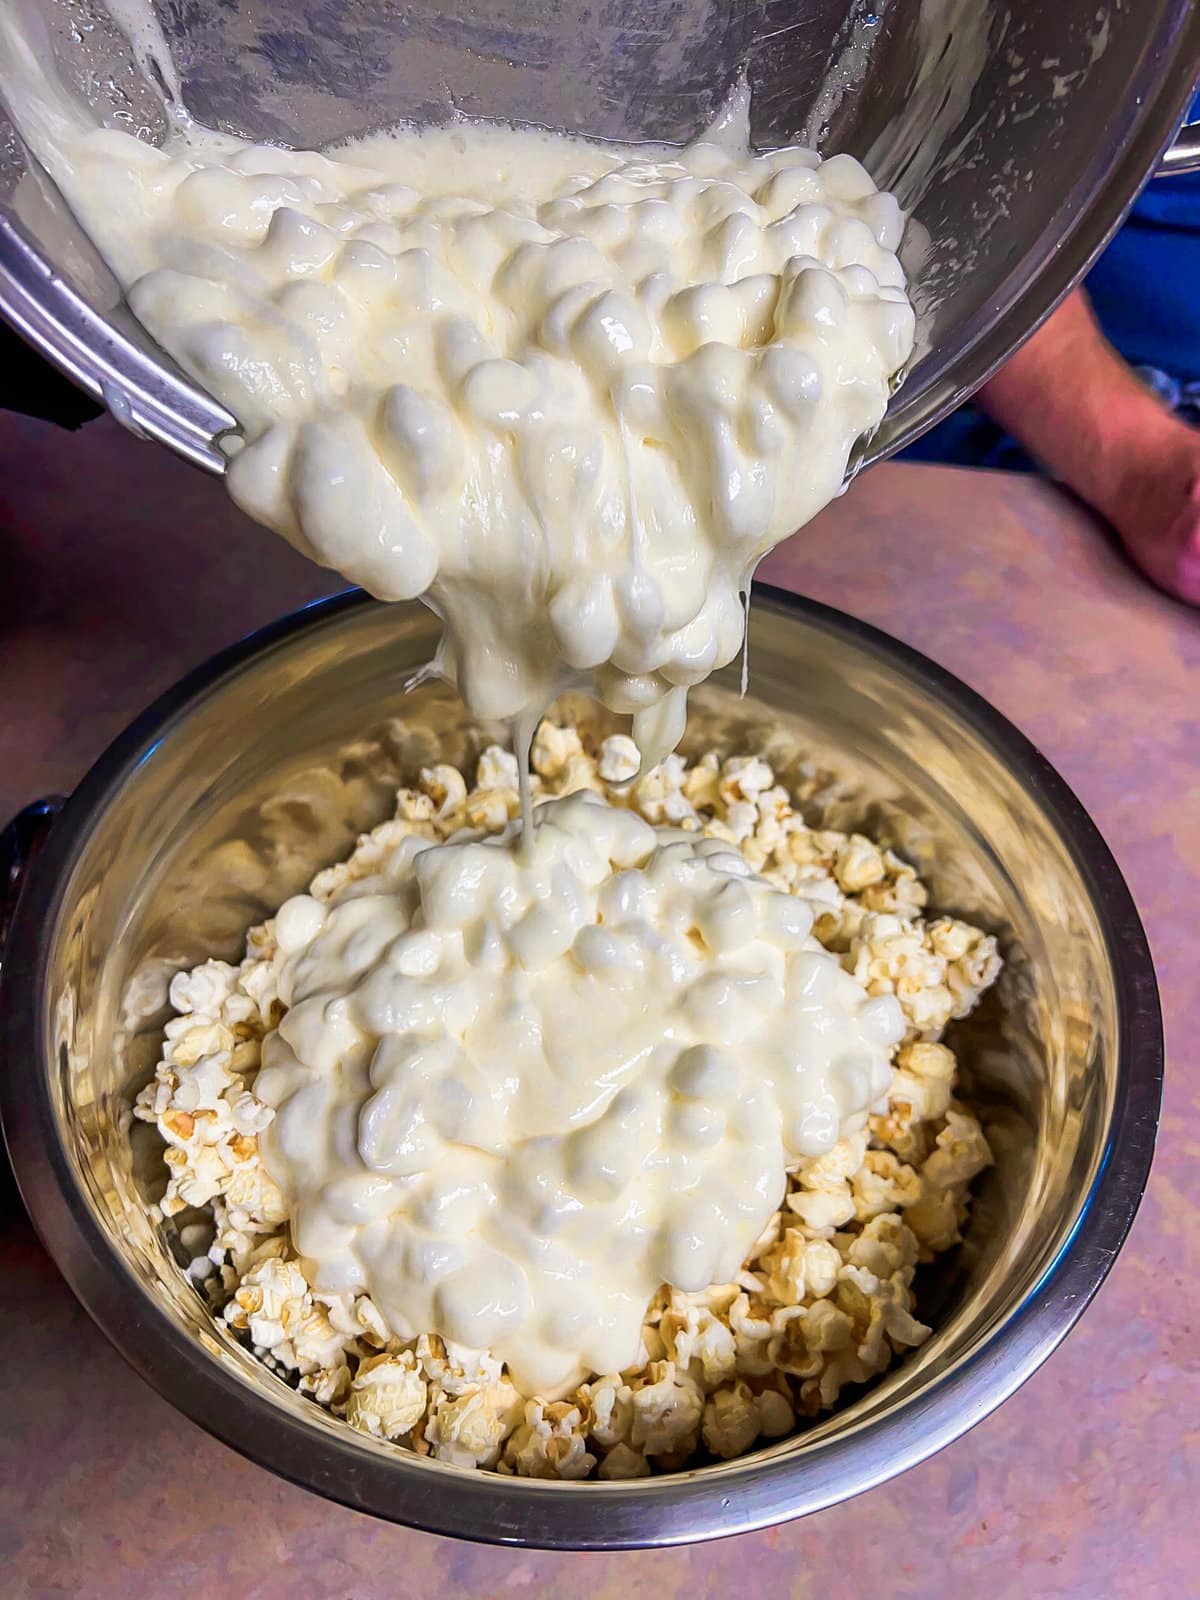 Marshmallow mixture poured over kettle corn in a bowl.